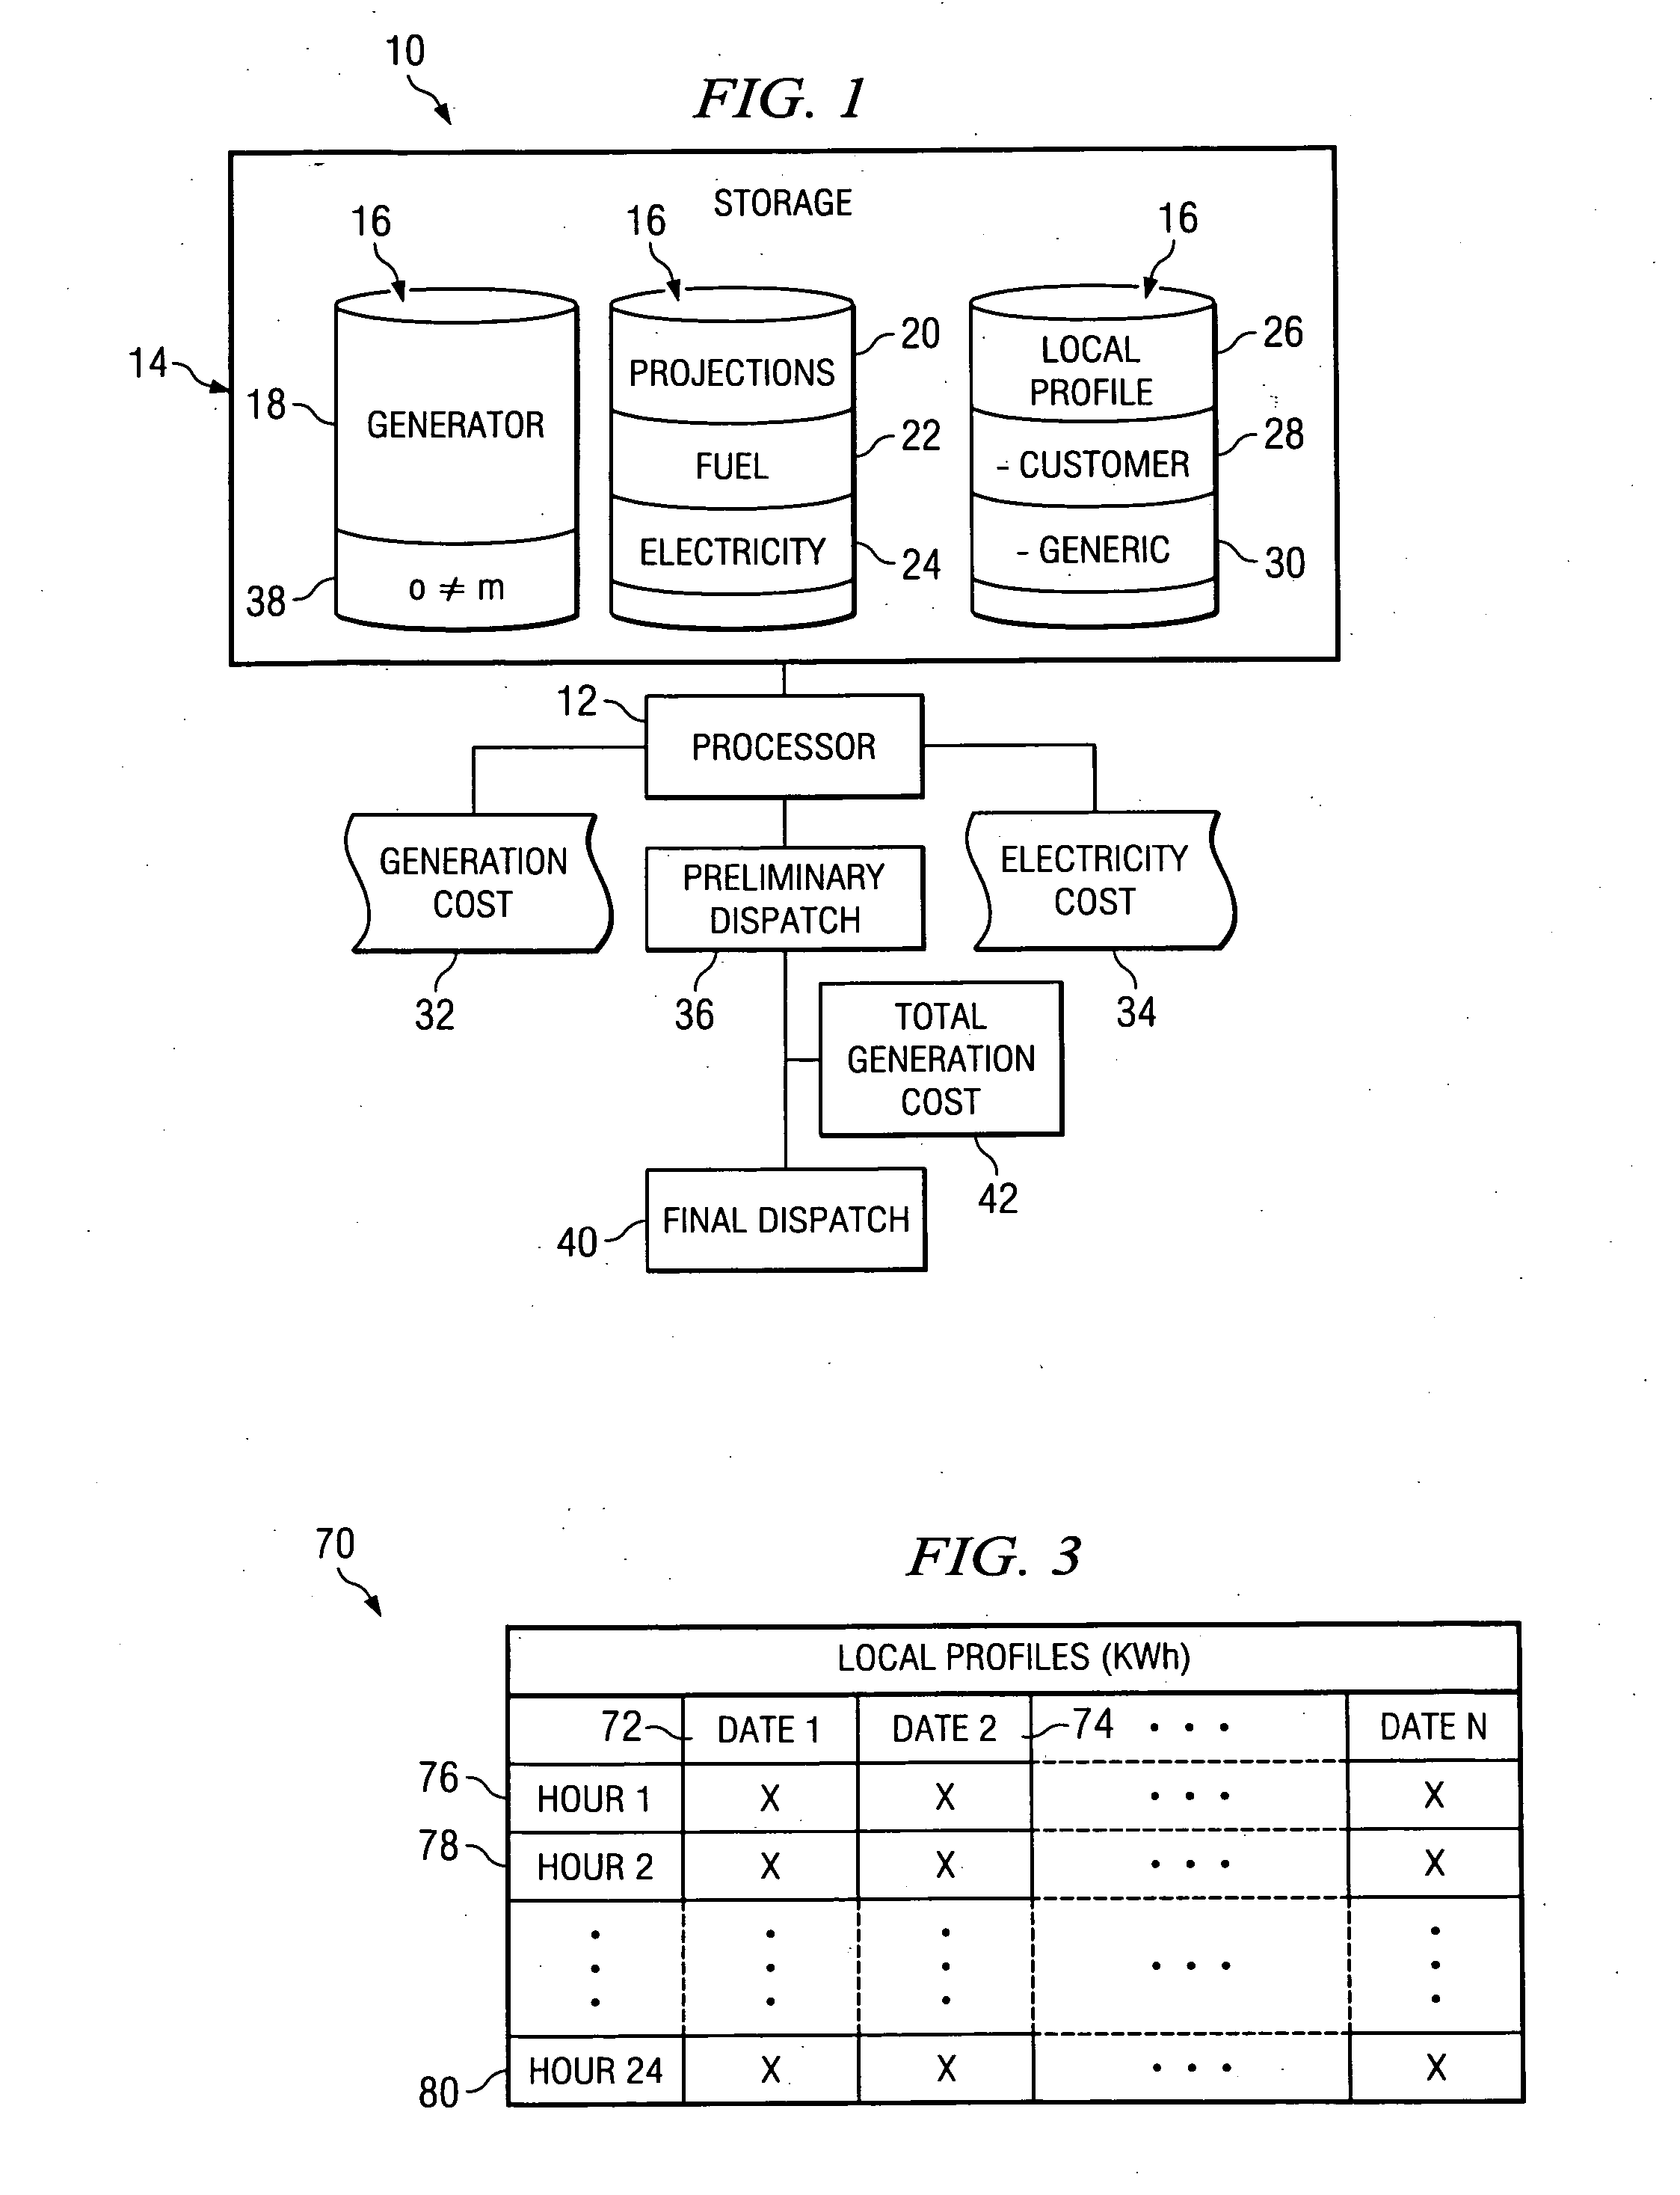 Distributed generation modeling system and method